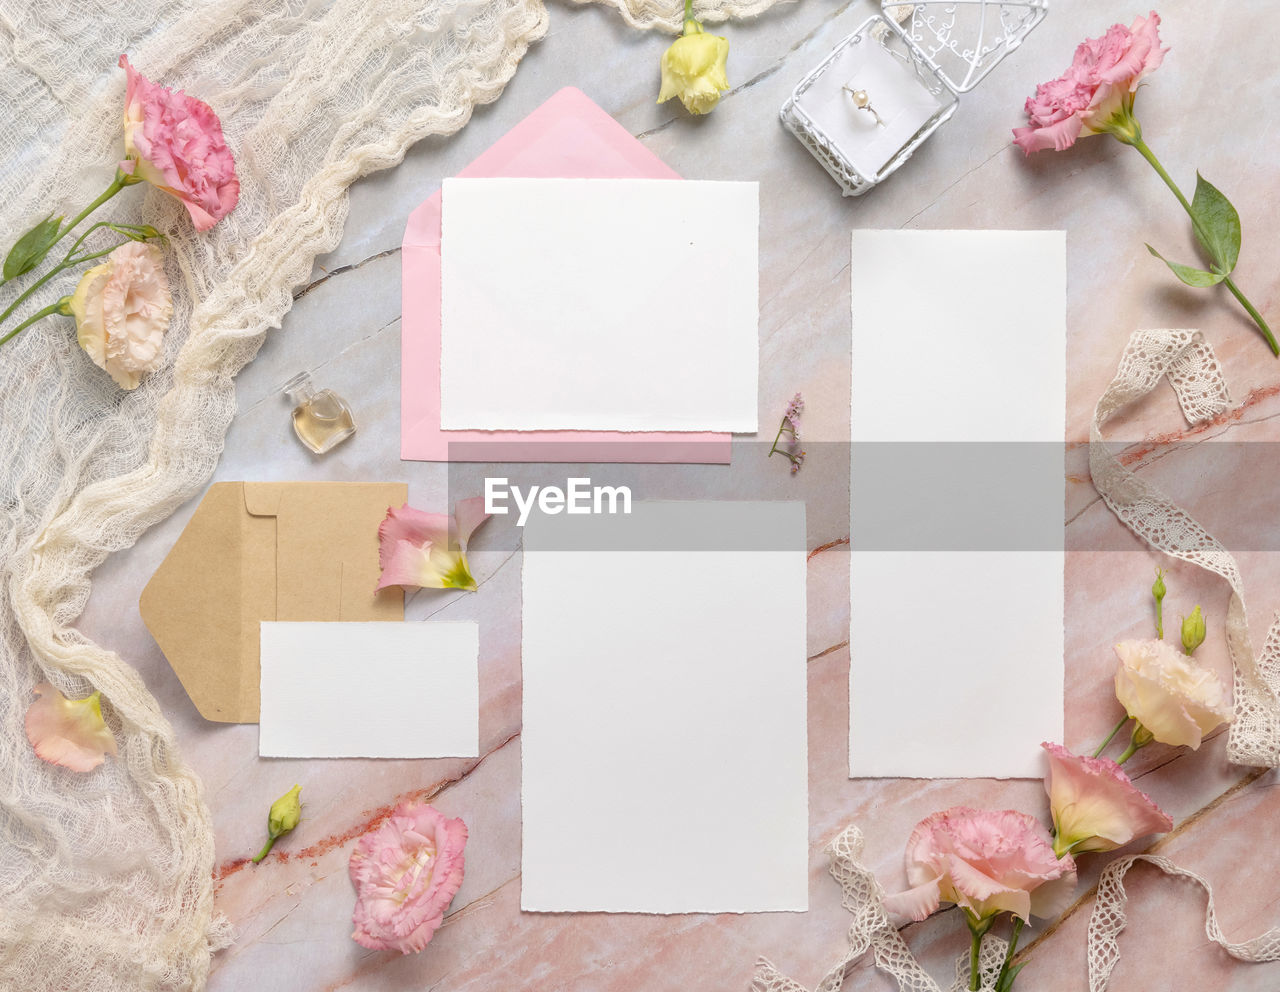 Wedding wedding stationery set with envelope laying on a marble table